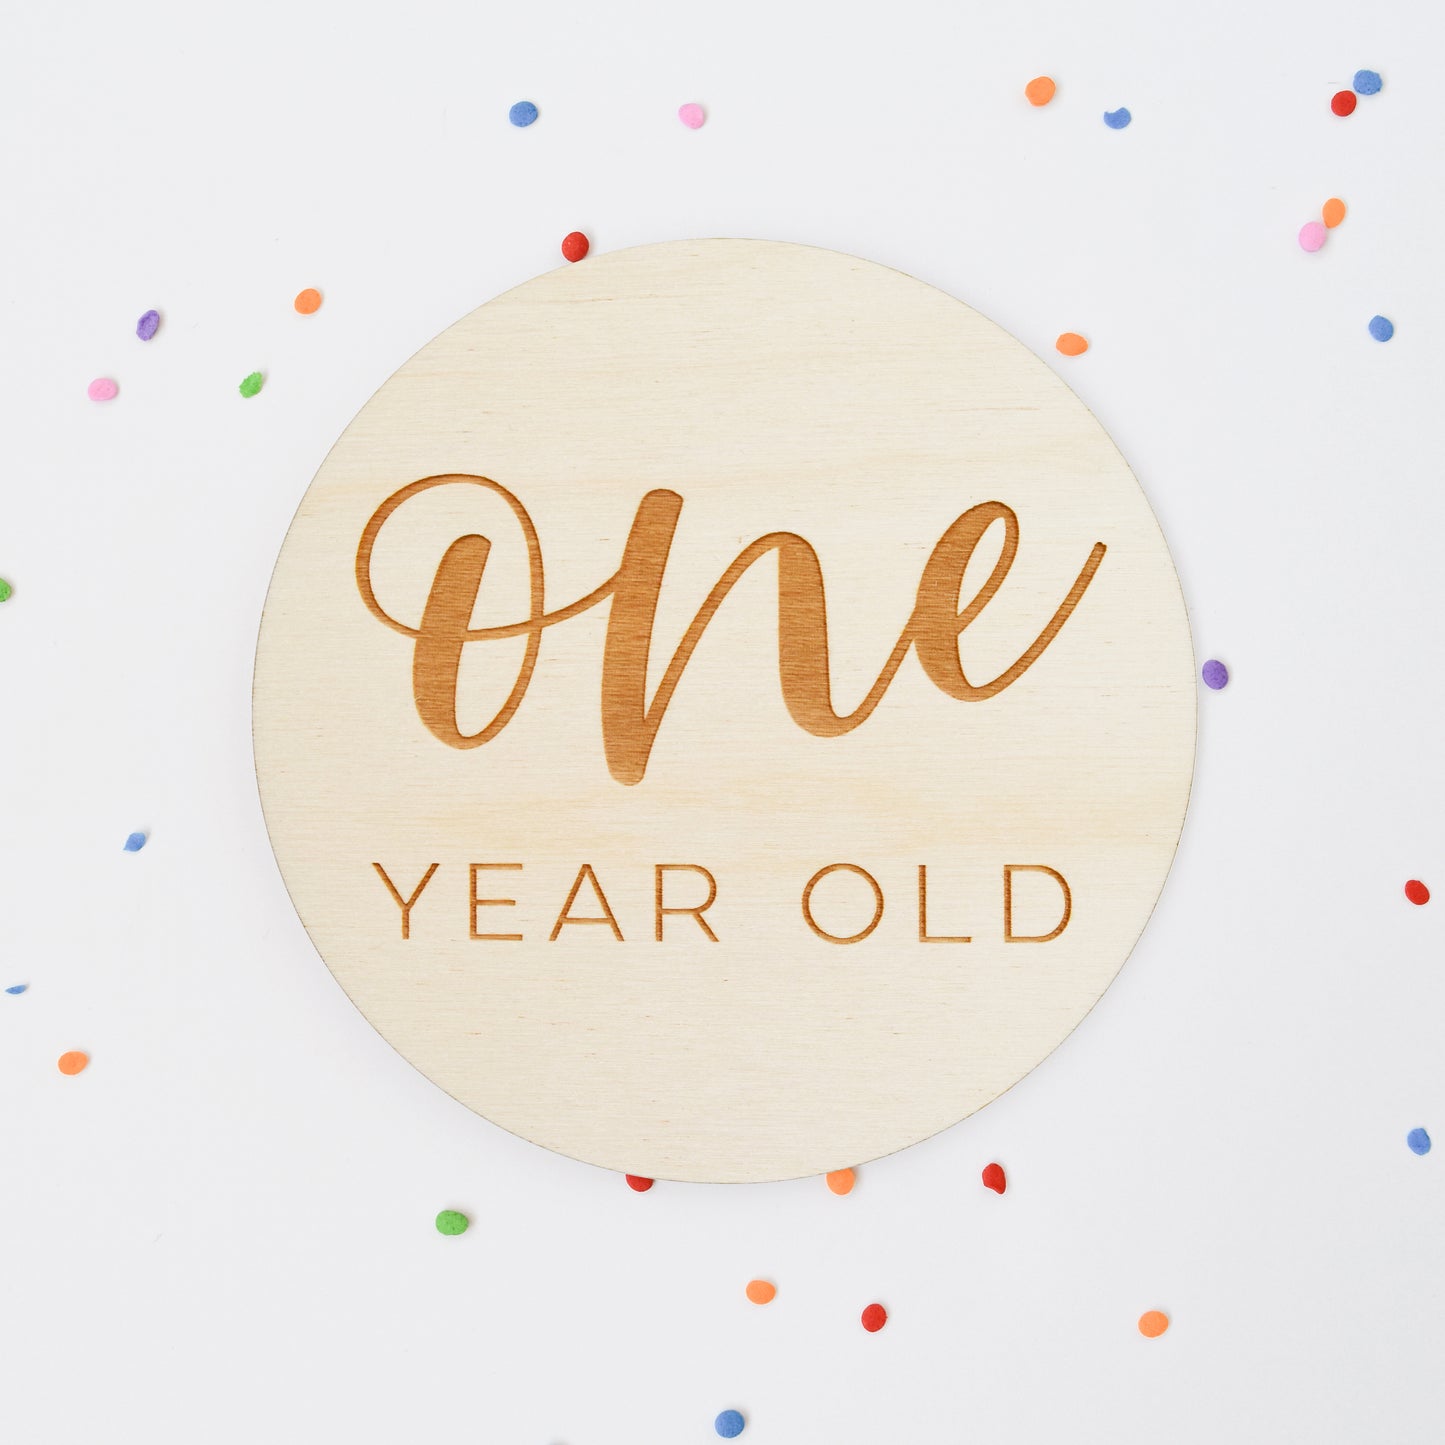 One Year Old Sign: Cheerful Script